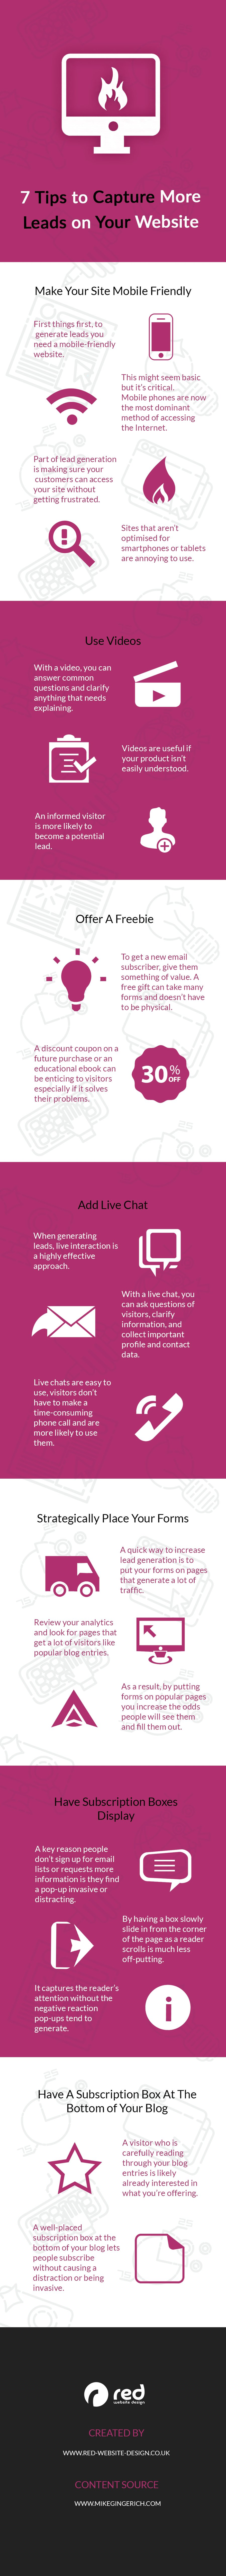 Infographic explaining how to capture leads on a web site